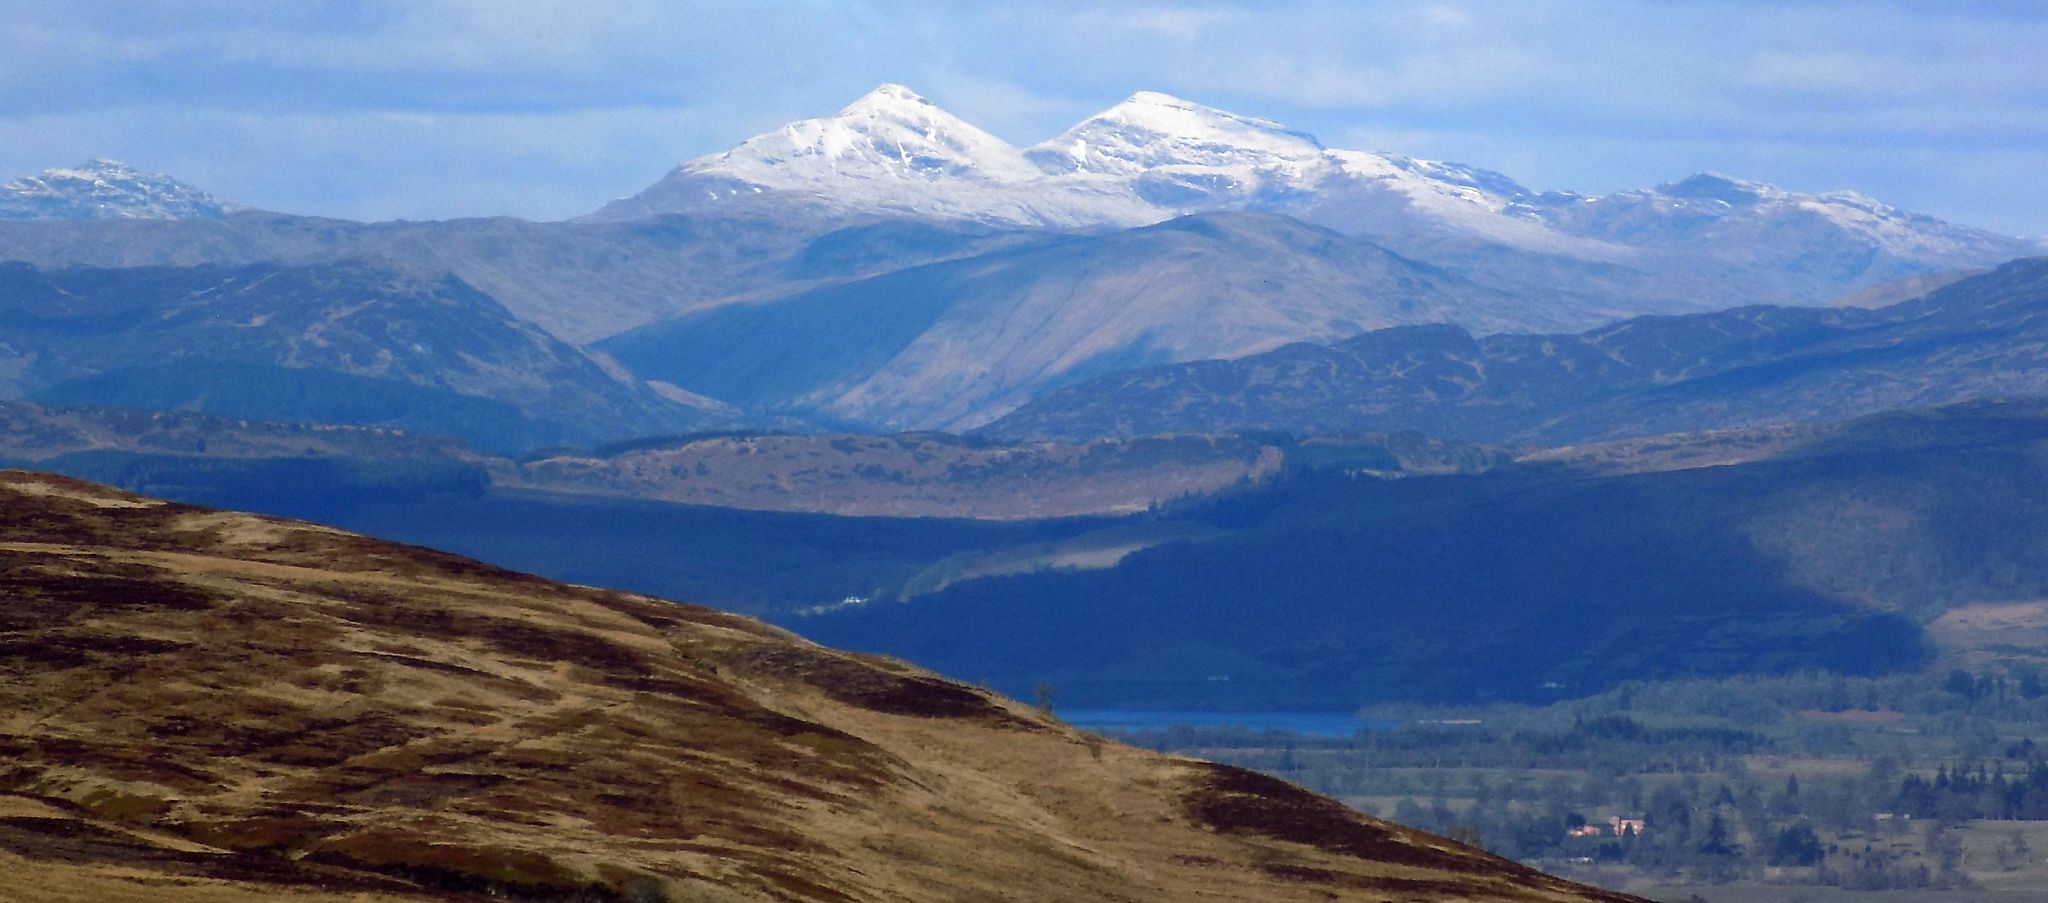 Stob Binnein and Ben More from the Fintry Hills